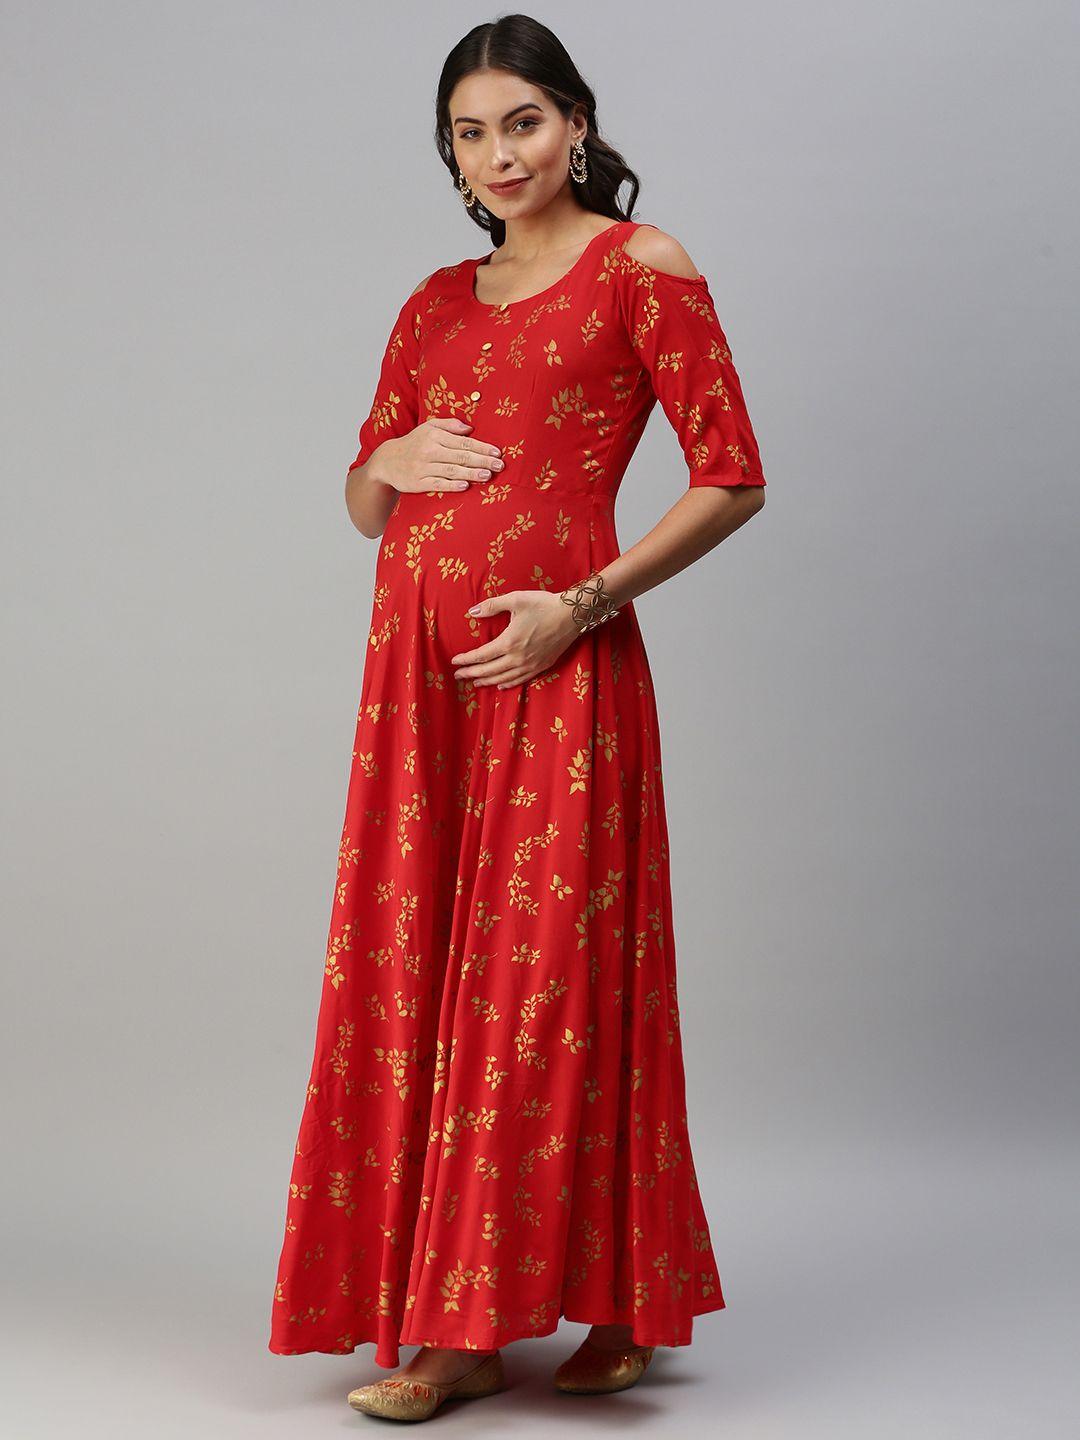 swishchick red & golden floral printed maternity maxi dress